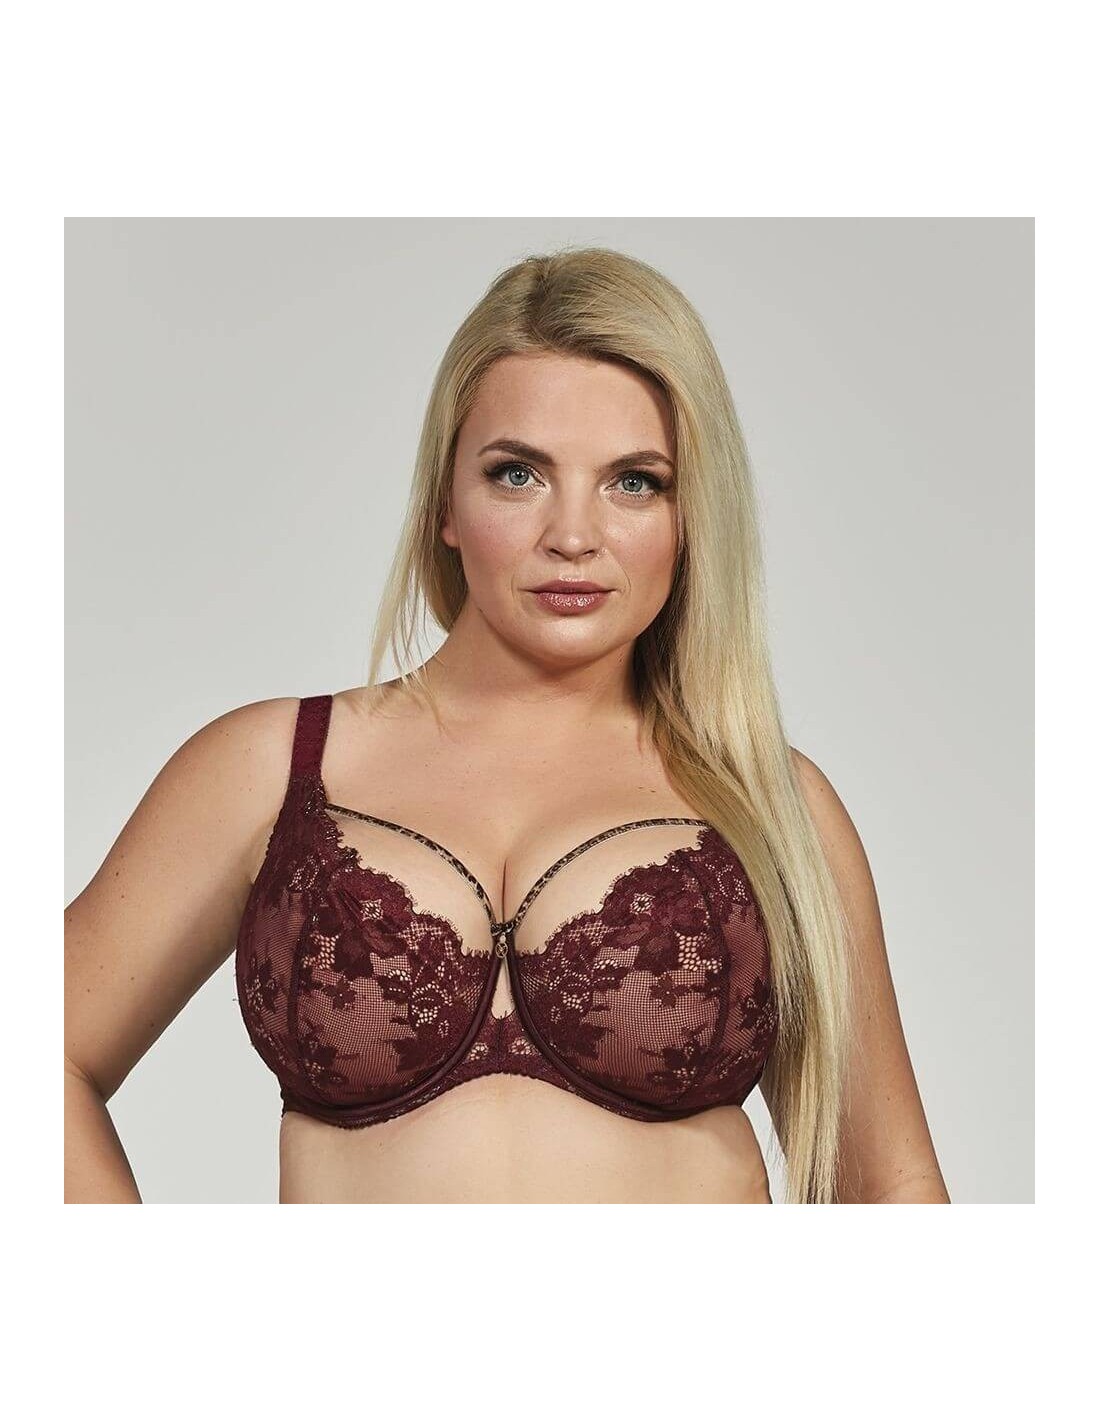 Plus Size Bra with Soft Cups for Large Breasts - Krisline SELENA